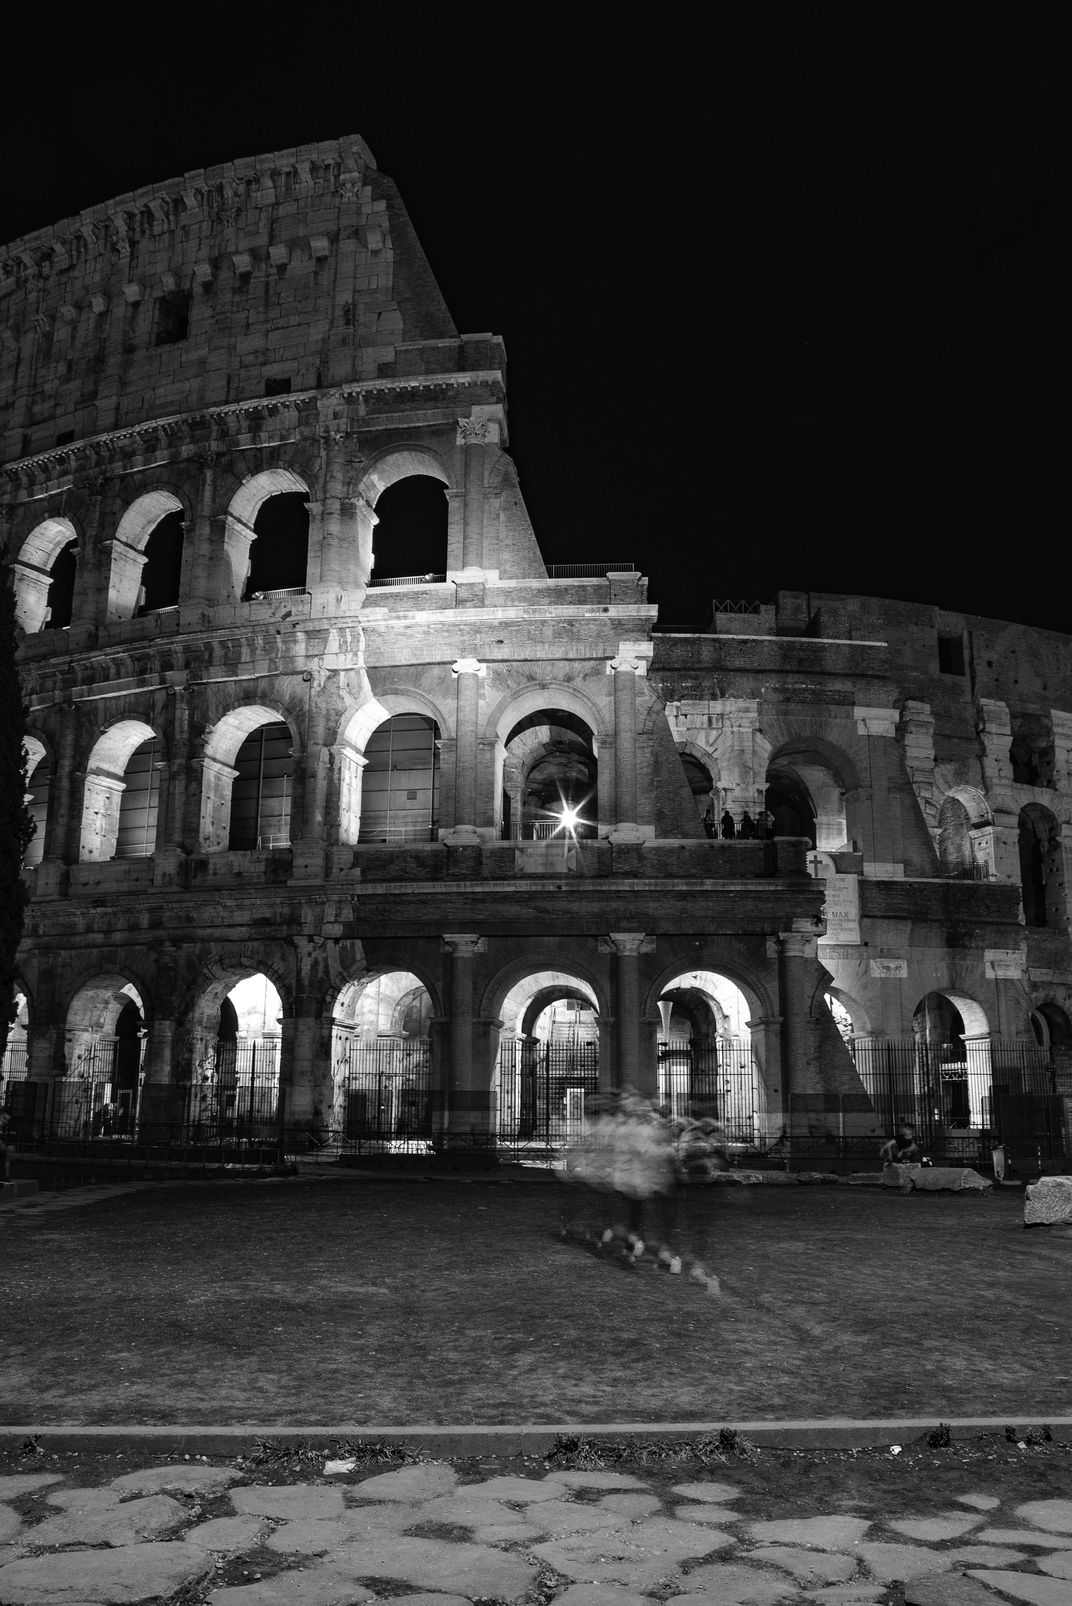 11 - Built more than 1,900 years ago, the Colosseum has been drawing visitors from around the world for centuries. It has stood the test of time.